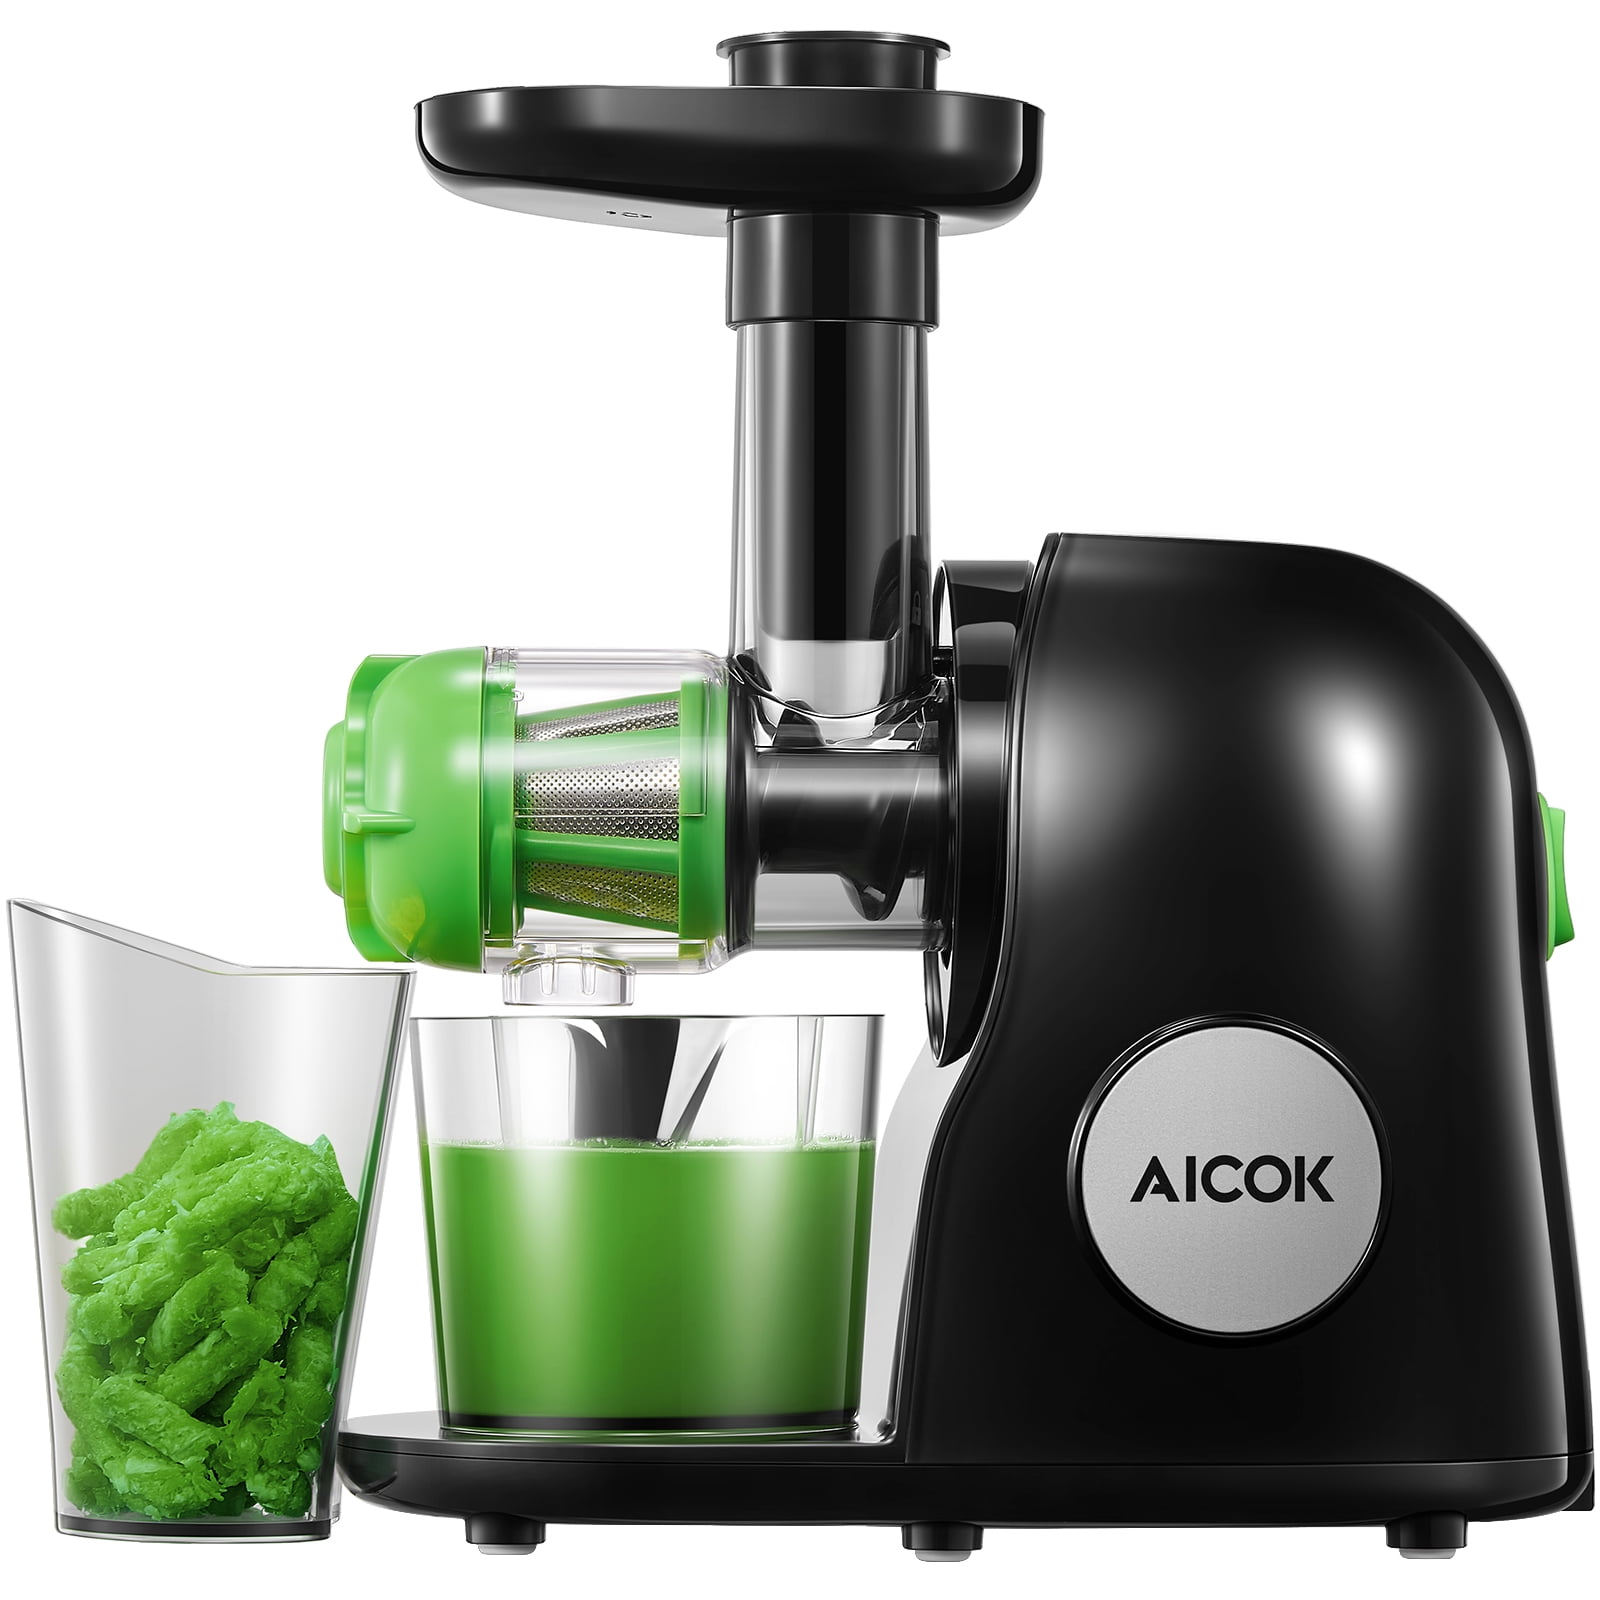 Juicer vegetables and fruit Aicok slow juicer with reversing function,